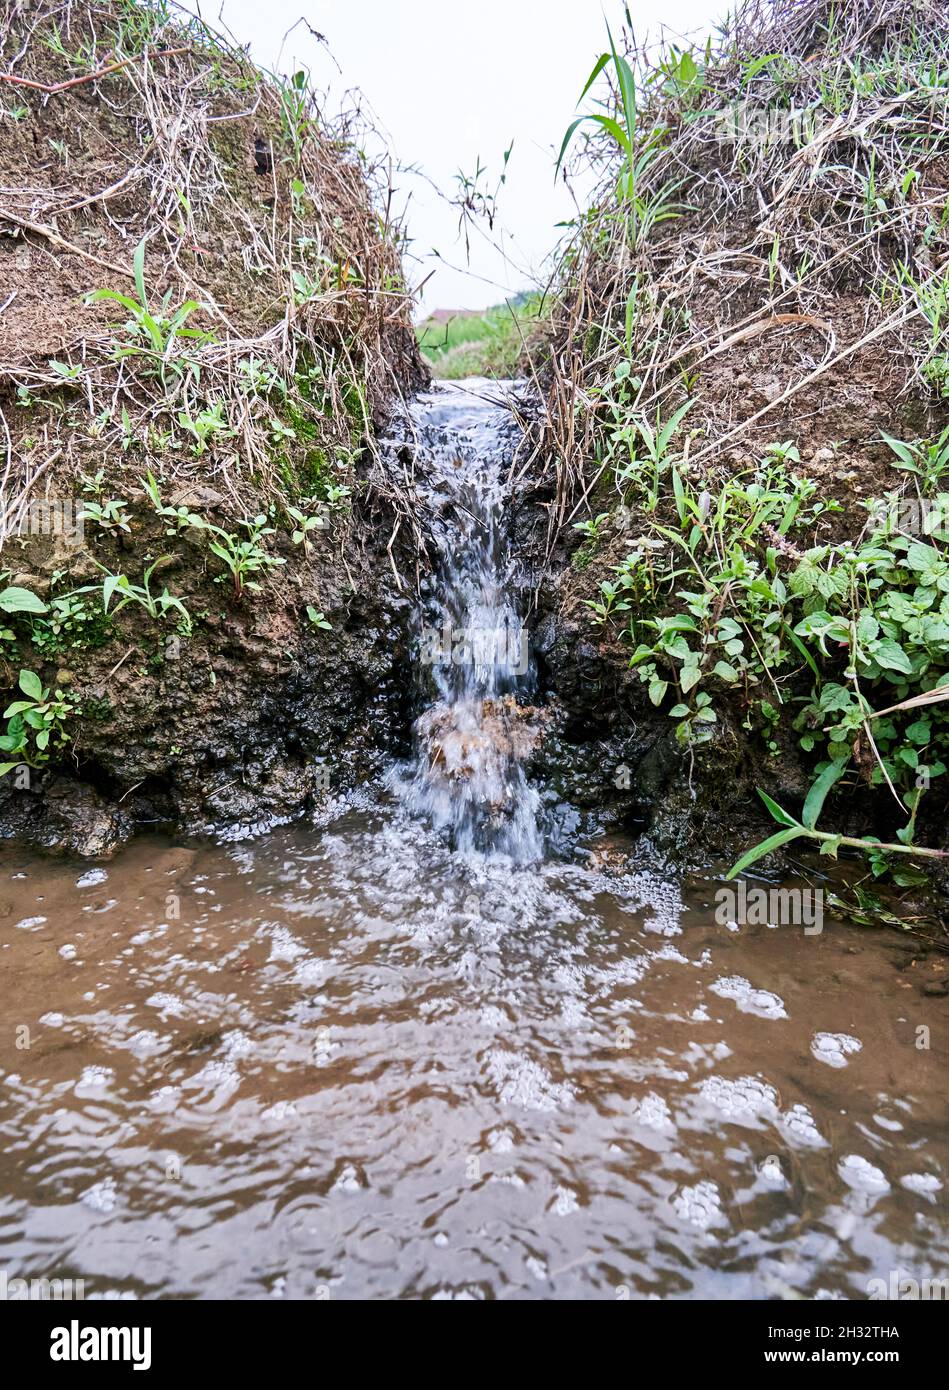 close-up of fresh water flowing in the rice field area Stock Photo